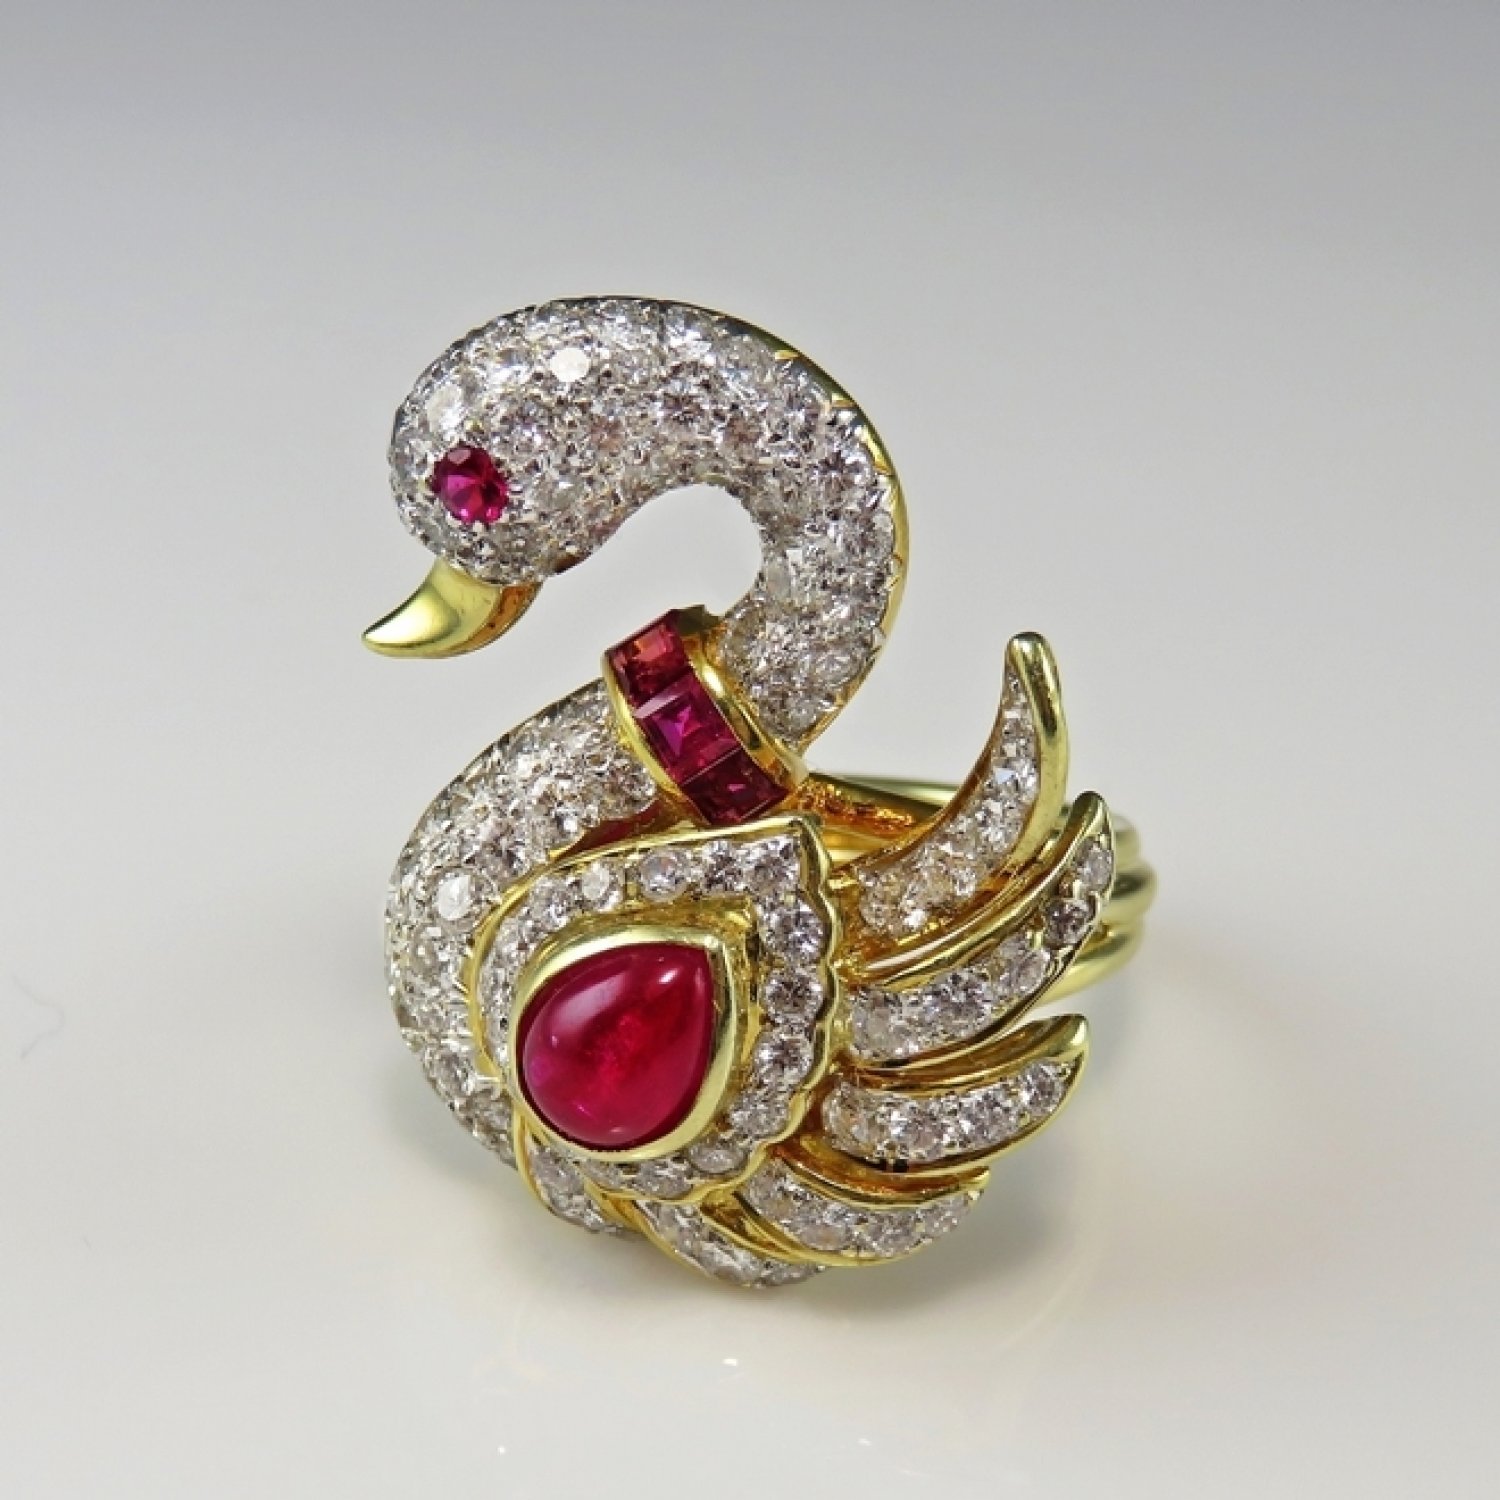 Swan Ring Swan Jewelry Ruby Cabochon Ring Natural Ruby Ring Cocktail Ring 80s Jewelry Ruby Diamond Ring Unique Engagement Ring 18K Gold Ring Wedding